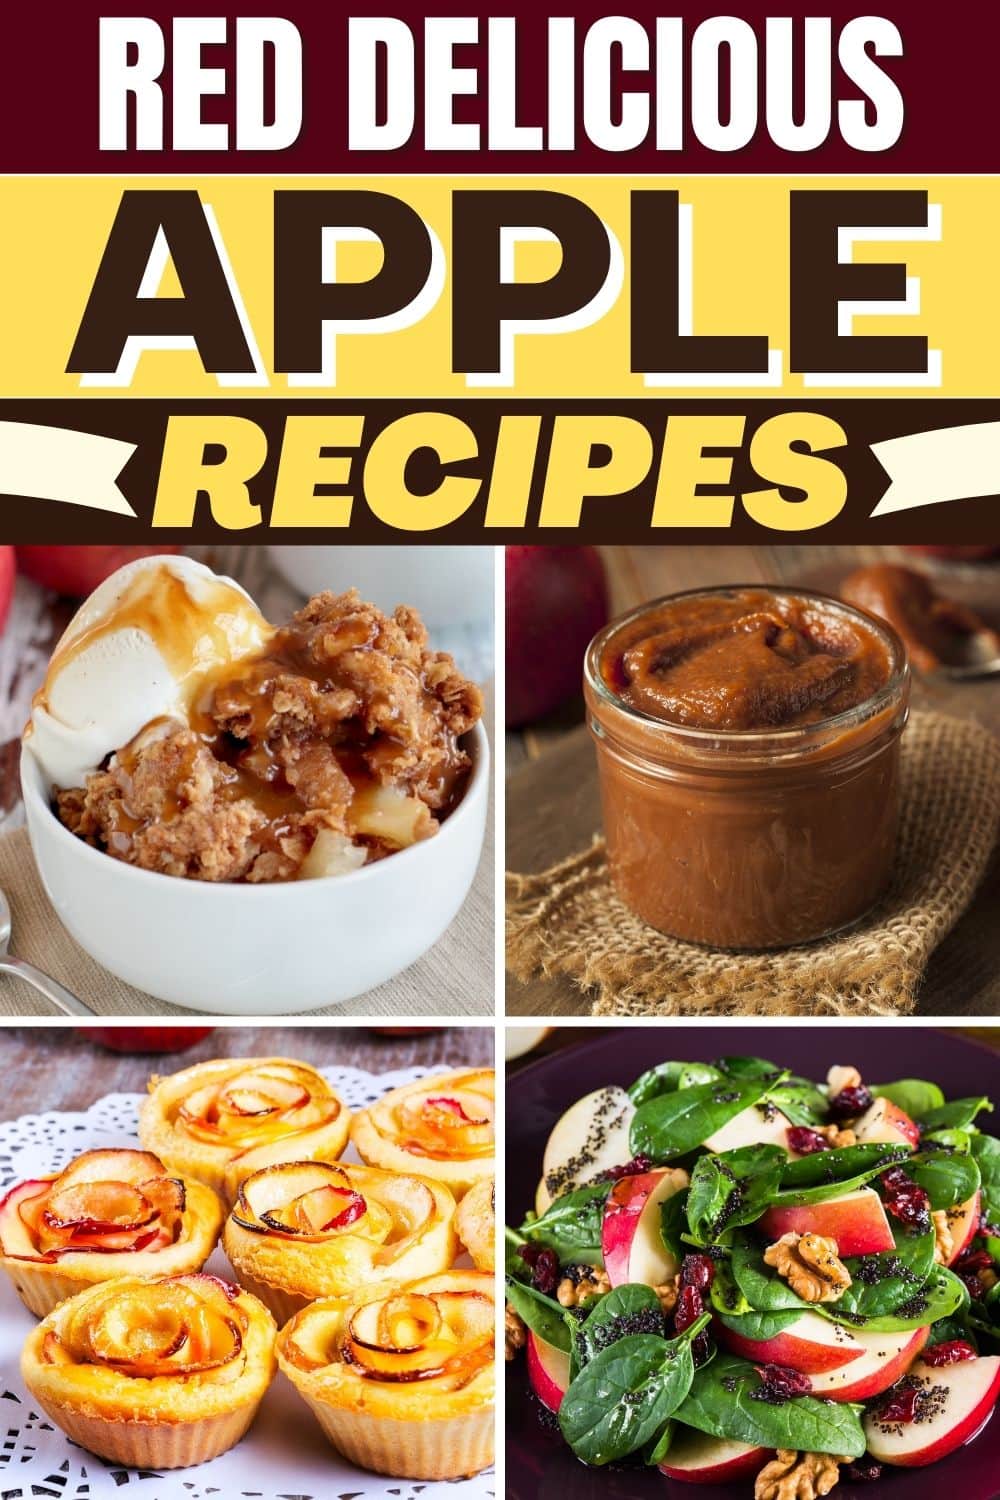 17 Red Delicious Apple Recipes From Dinner to Dessert - Insanely Good